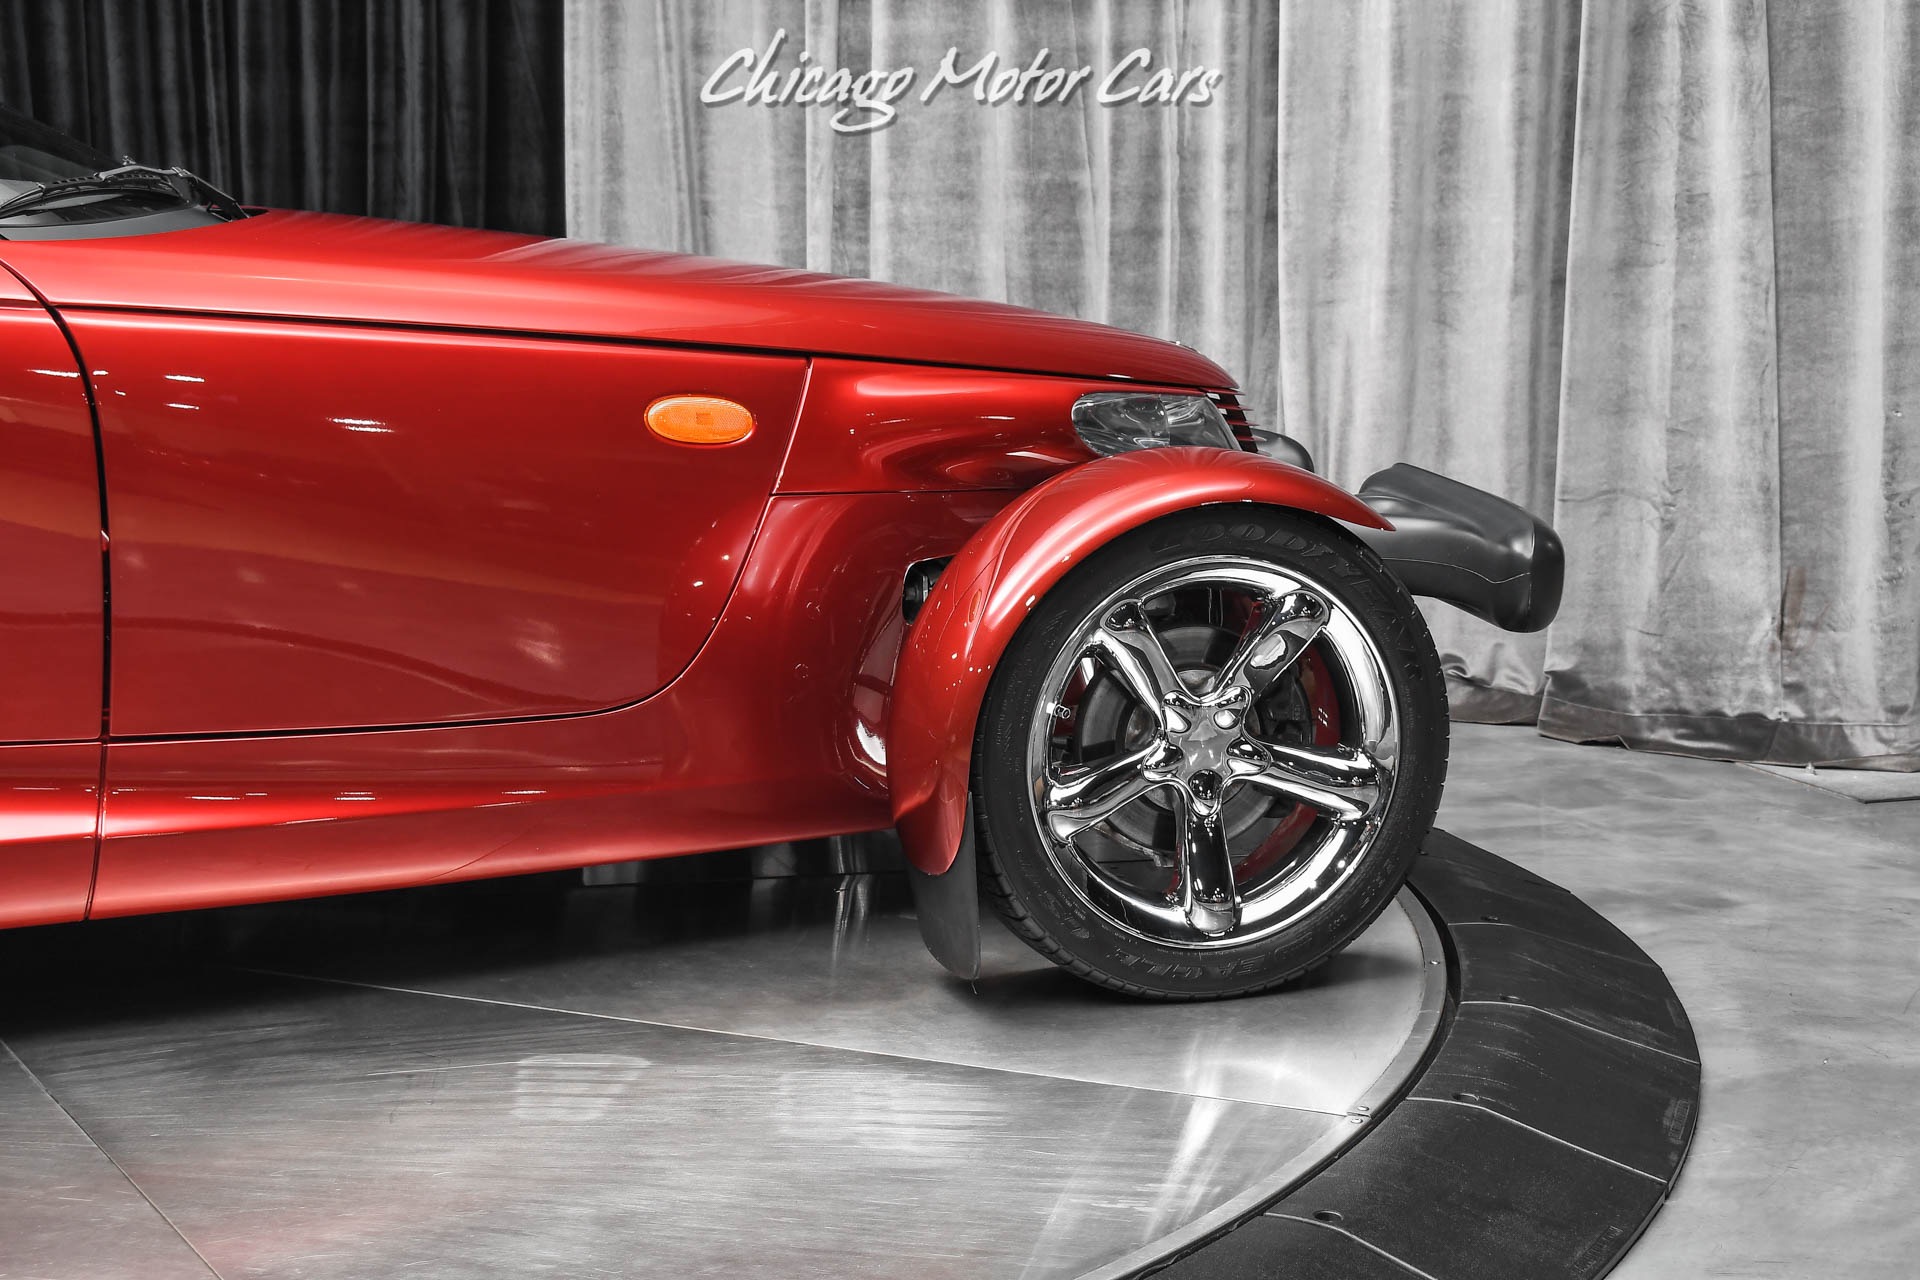 Used-2002-Chrysler-Prowler-Convertible-ONLY-13K-Miles-RARE-Candy-Red-Paint-Collectable